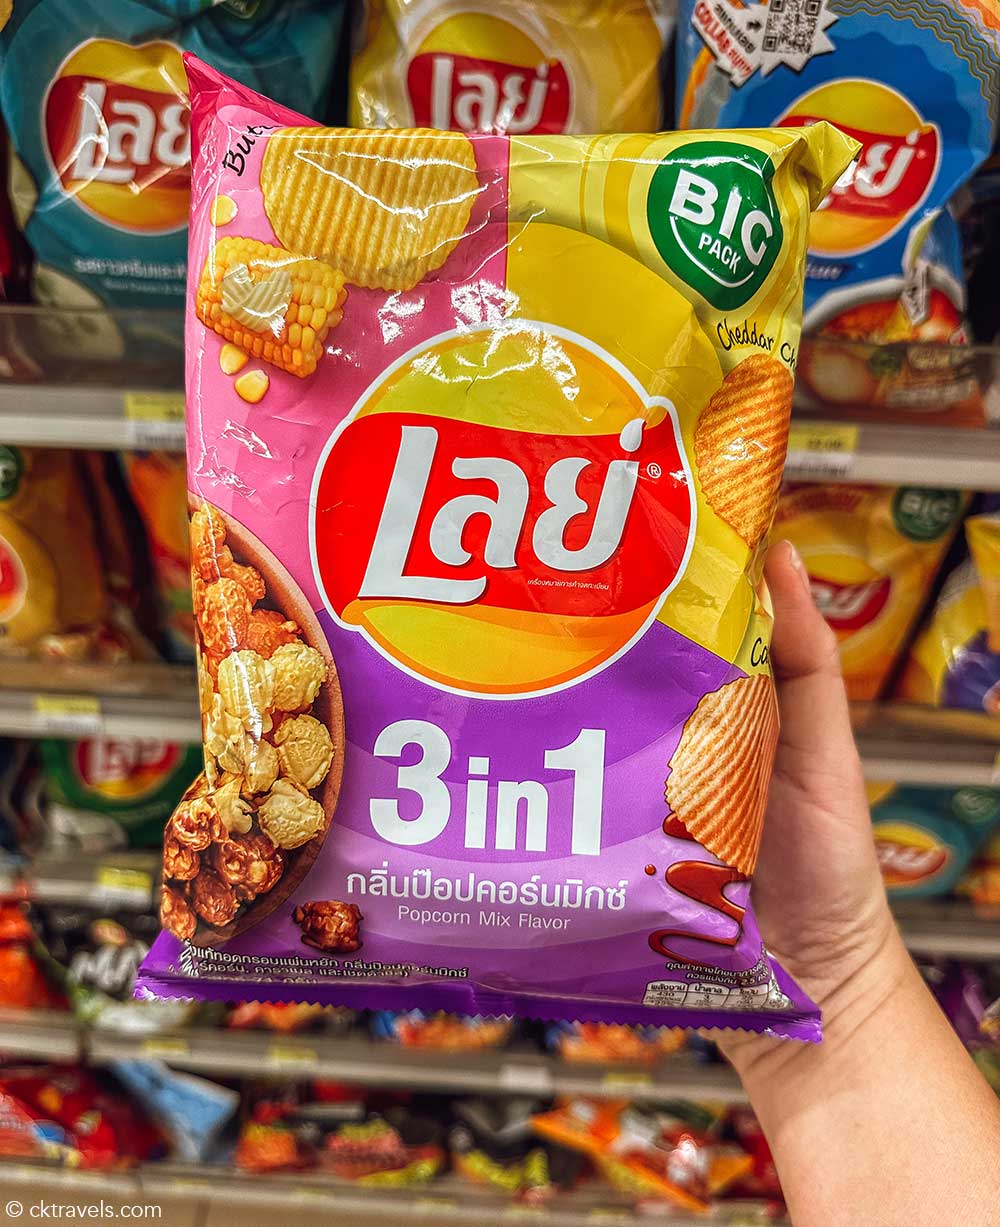 Lay’s Popcorn 3 in1 mix flavoured potato crisps Chips 7-Eleven Thailand